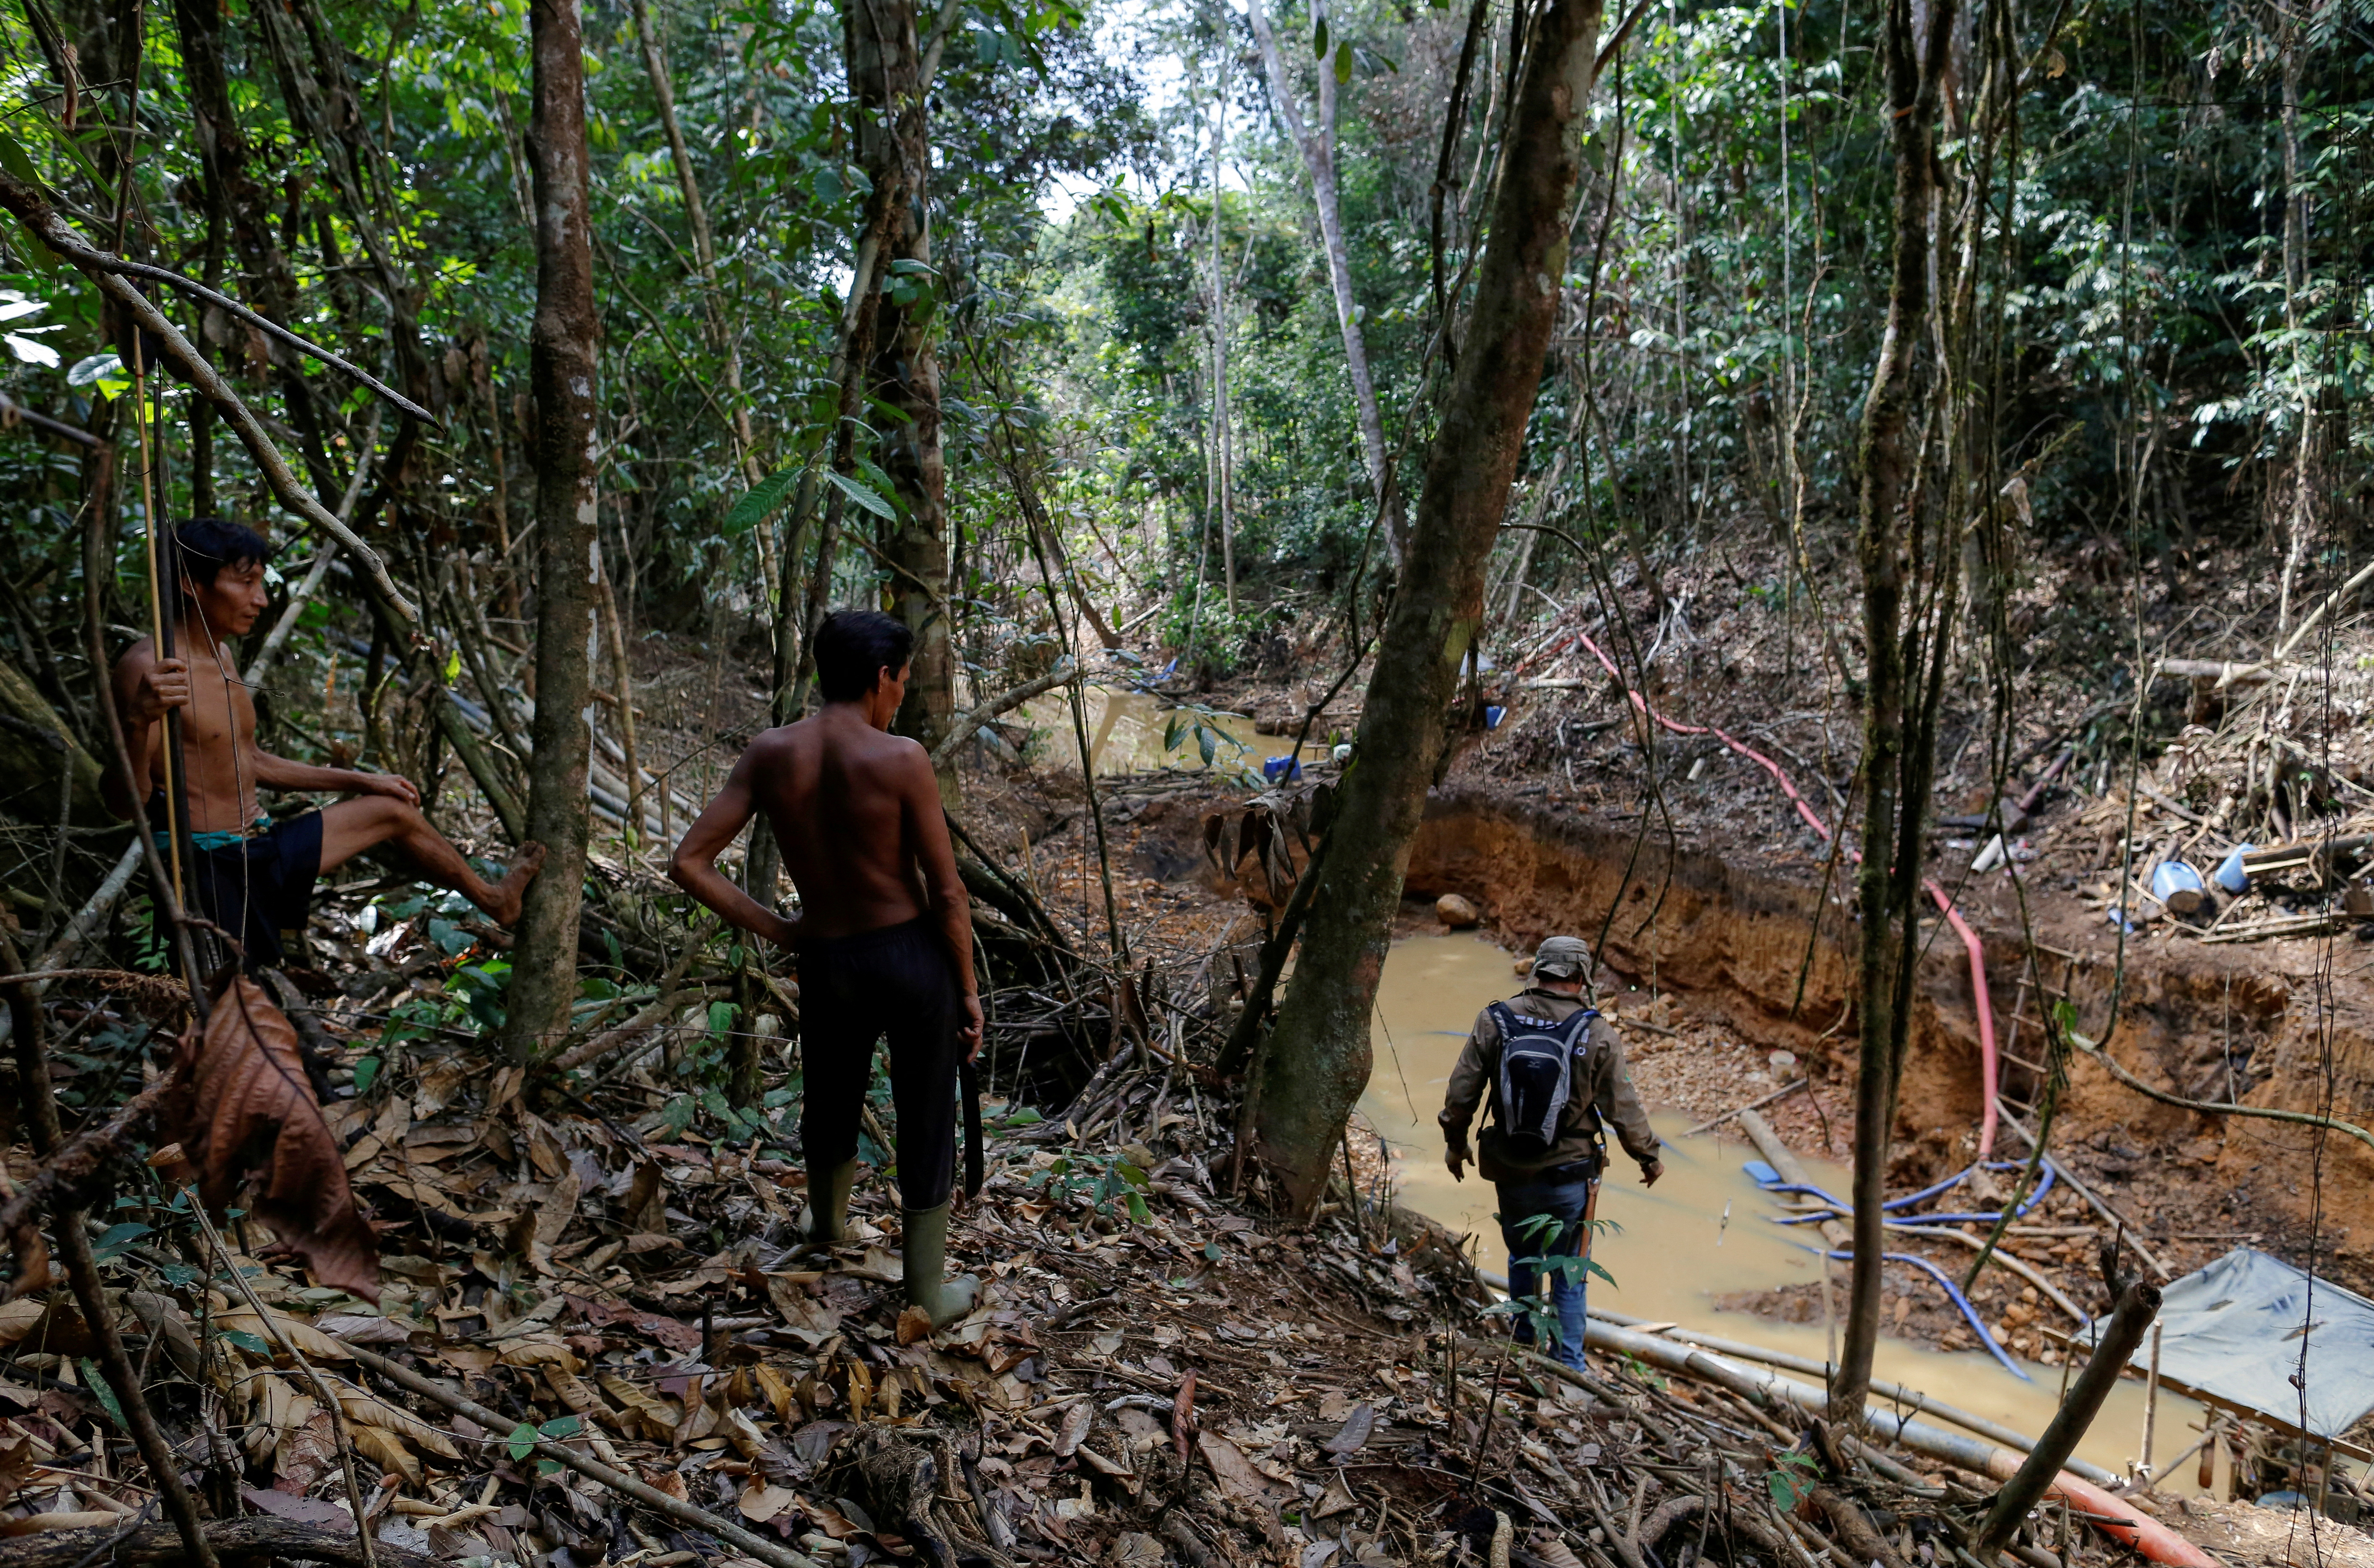 Yanomami indians follow agents of Brazil's environmental agency in a gold mine during an operation against illegal gold mining on indigenous land, in the heart of the Amazon rainforest